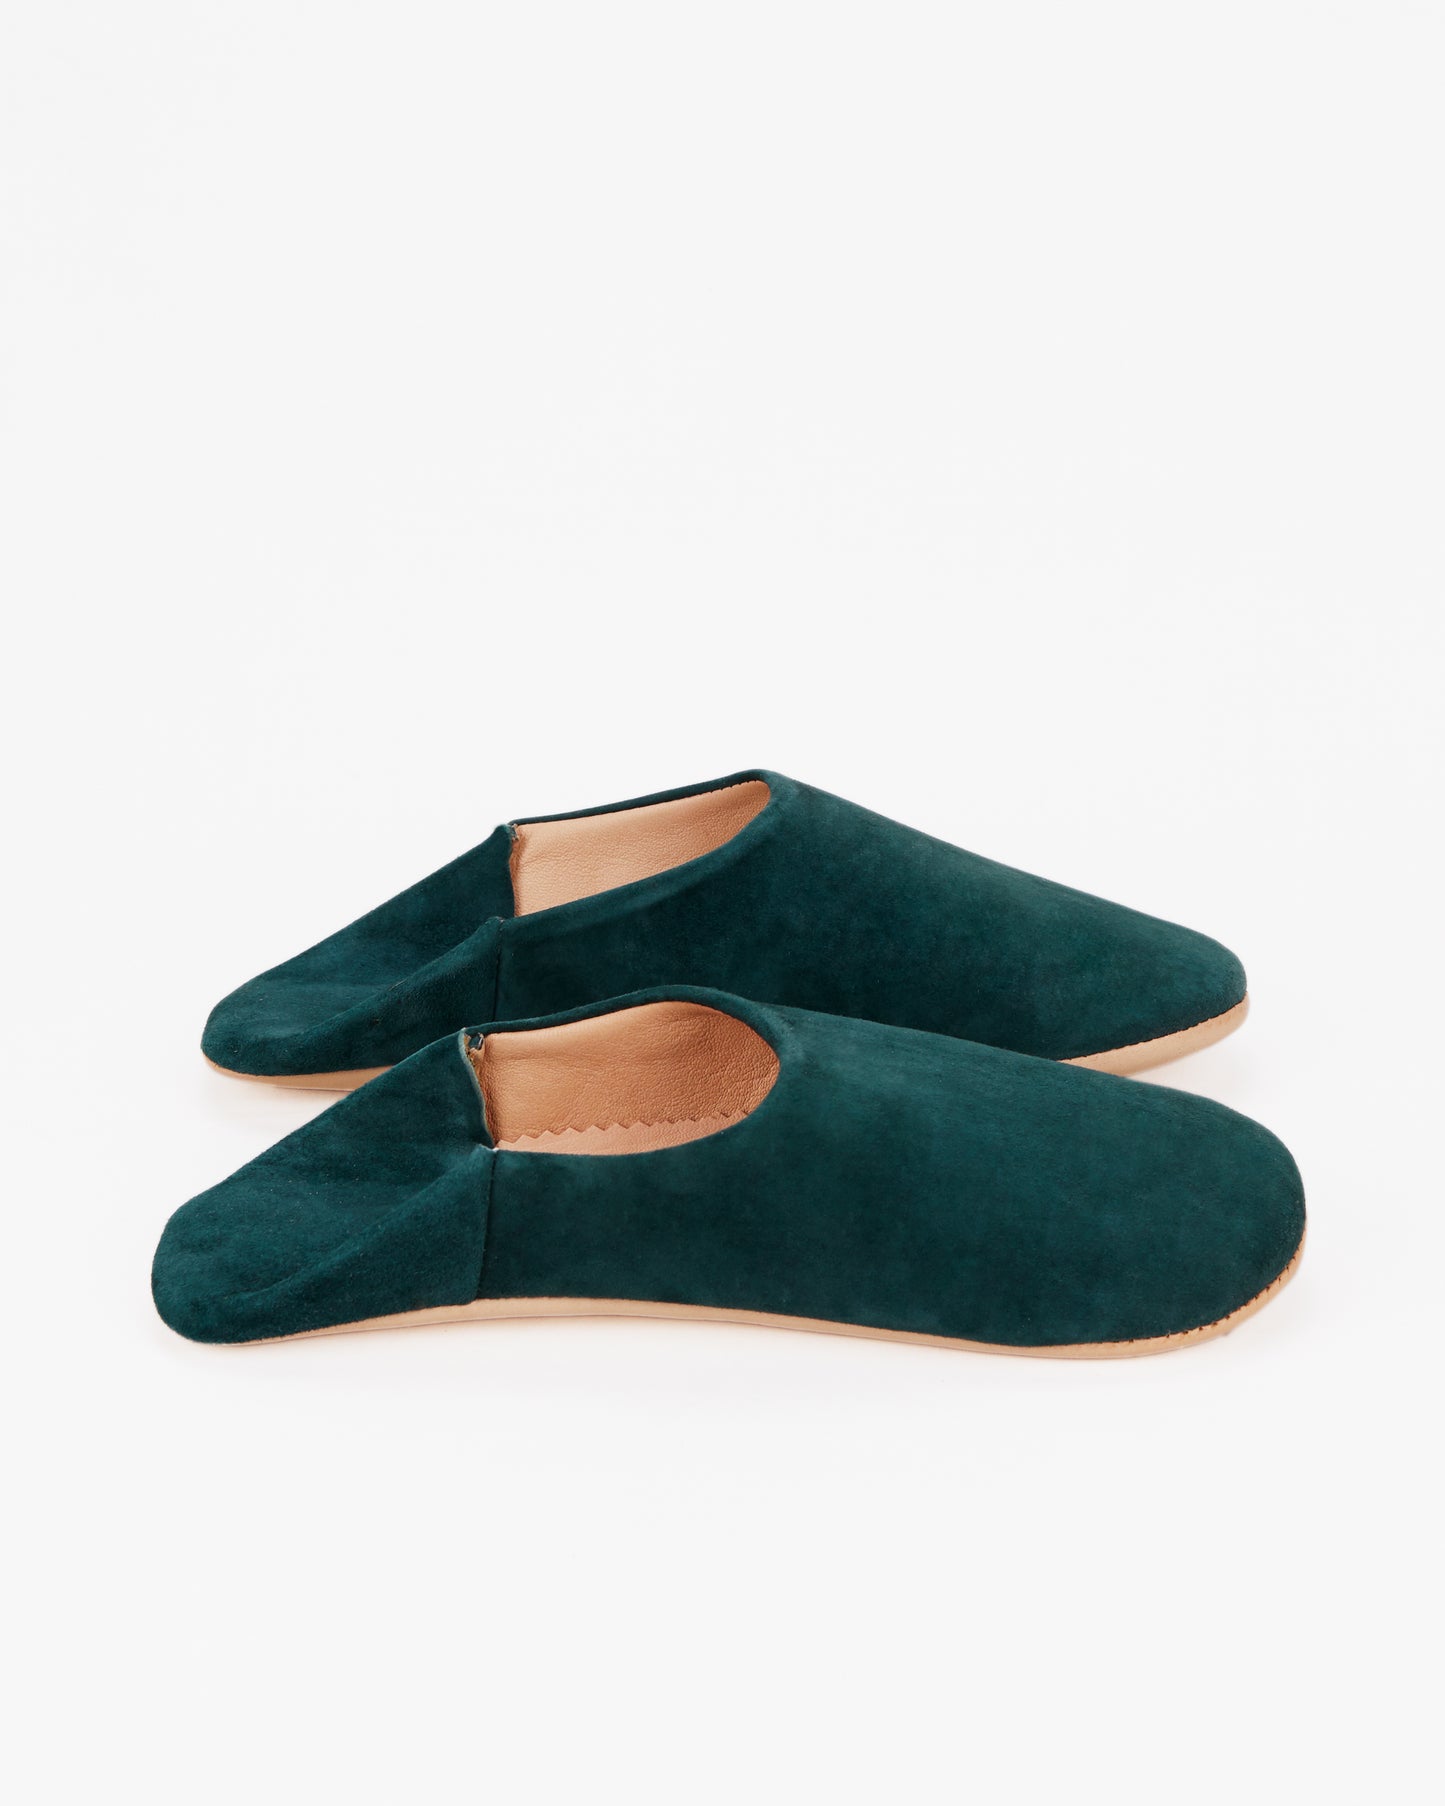 Moroccan Slippers, Teal/Plain